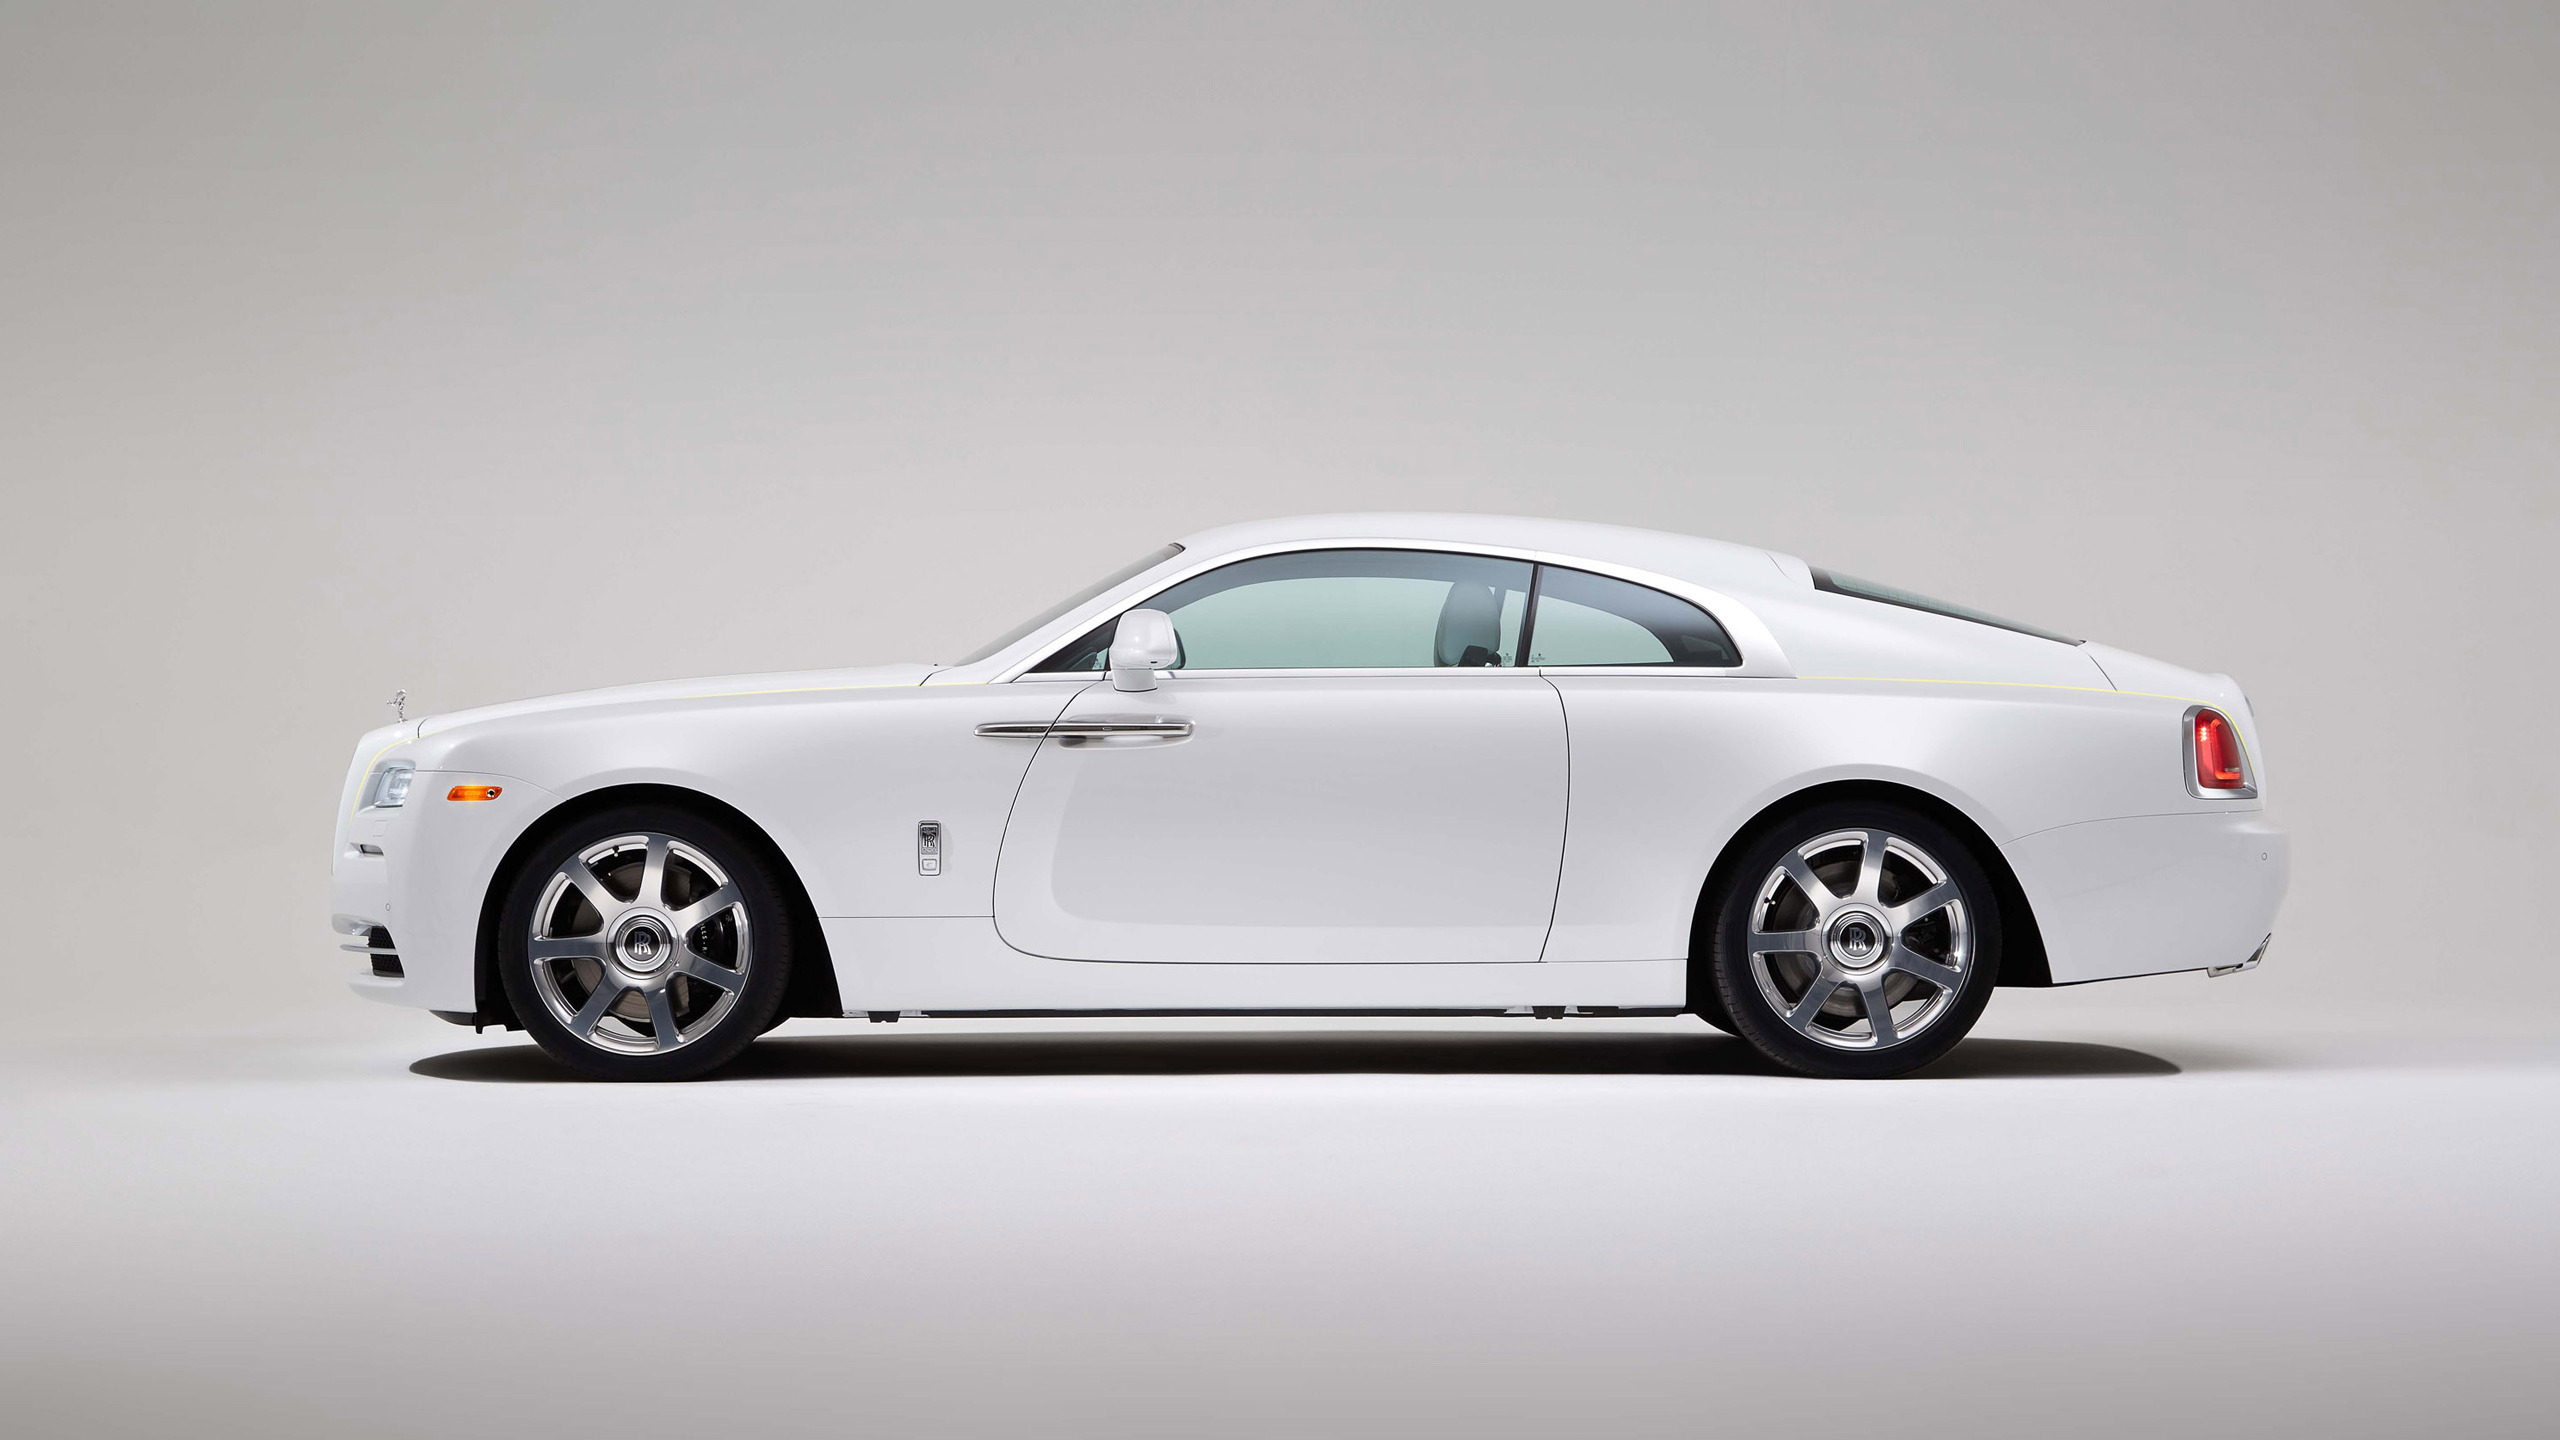 General 2560x1440 car Rolls-Royce luxury cars British cars white cars side view minimalism vehicle simple background